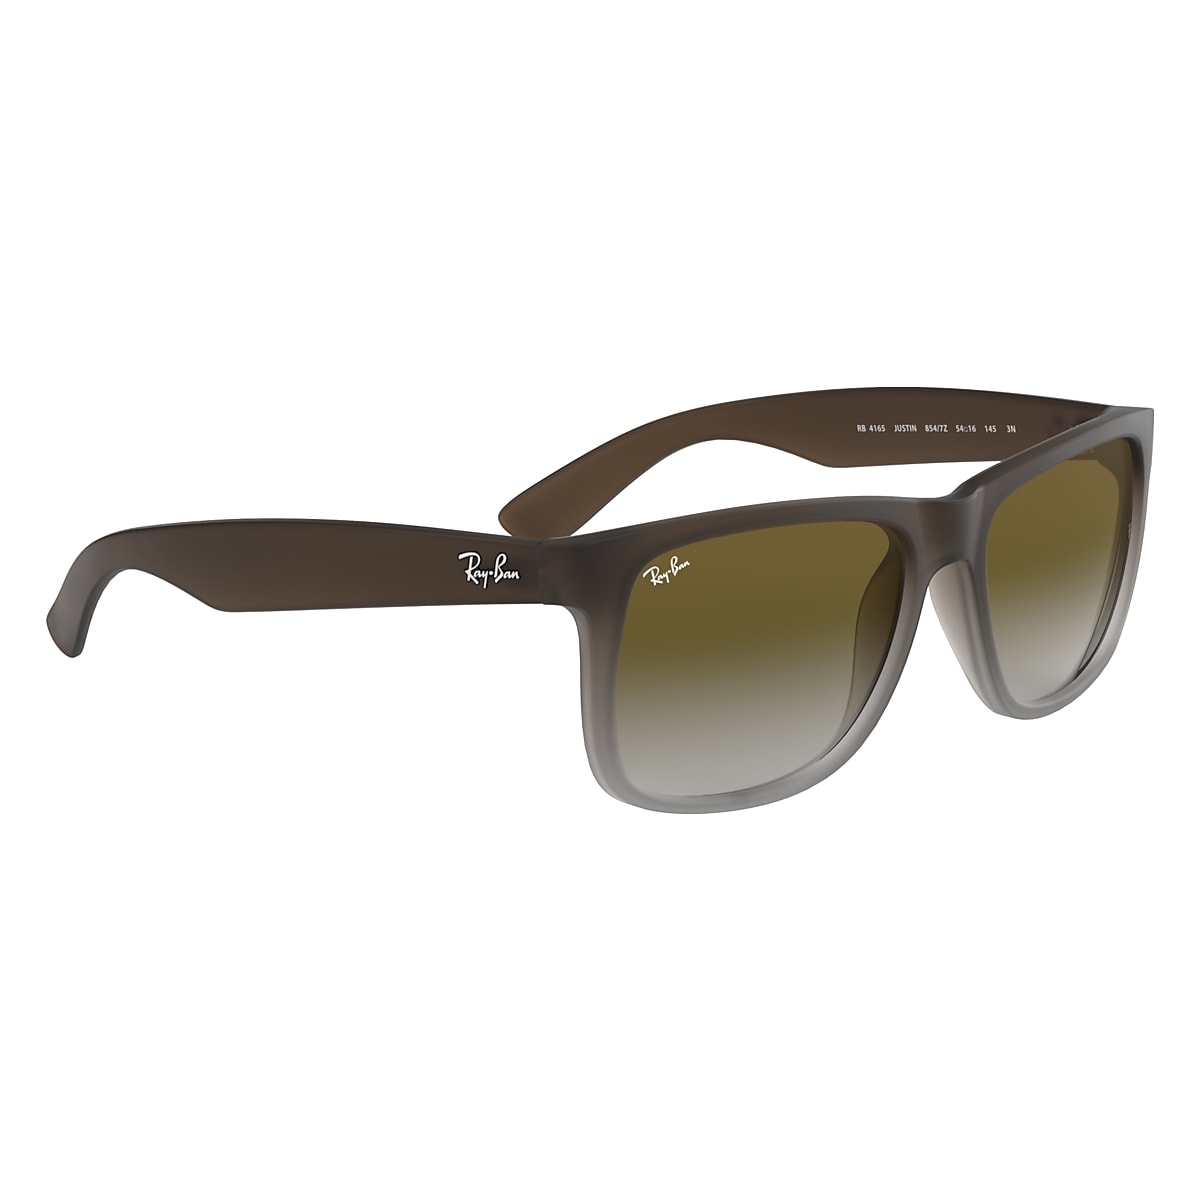 JUSTIN CLASSIC Sunglasses in Brown and Green - RB4165 | Ray-Ban® US